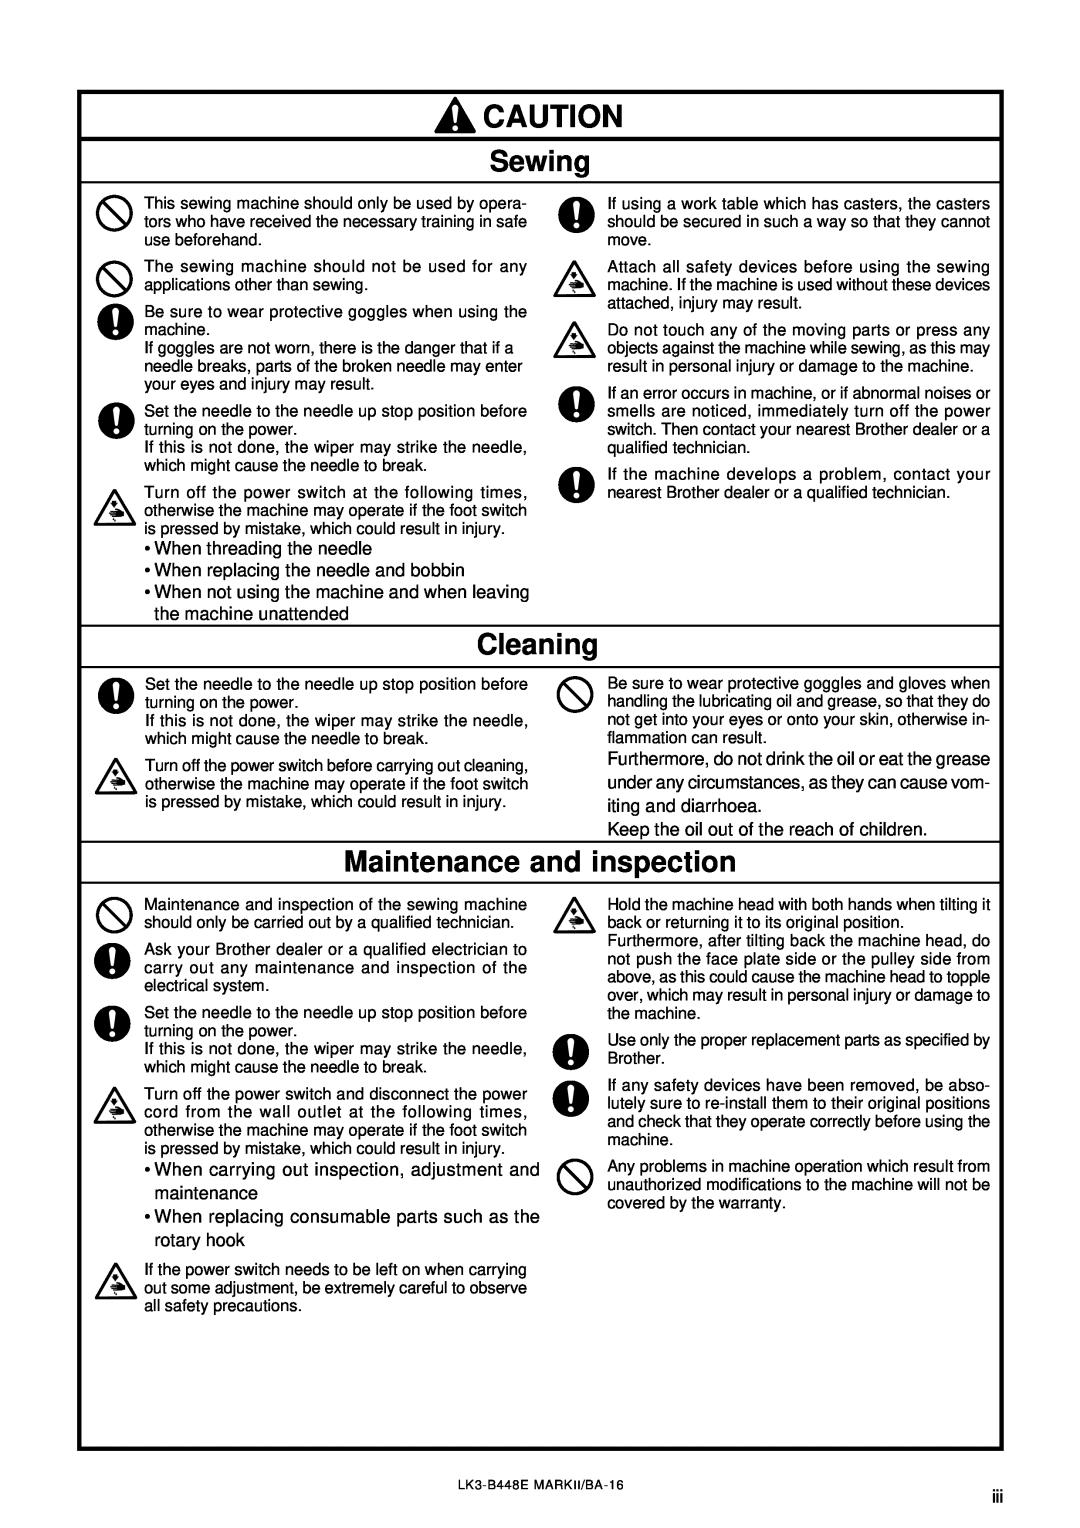 Brother LK3-B448E instruction manual Sewing, Cleaning, Maintenance and inspection 